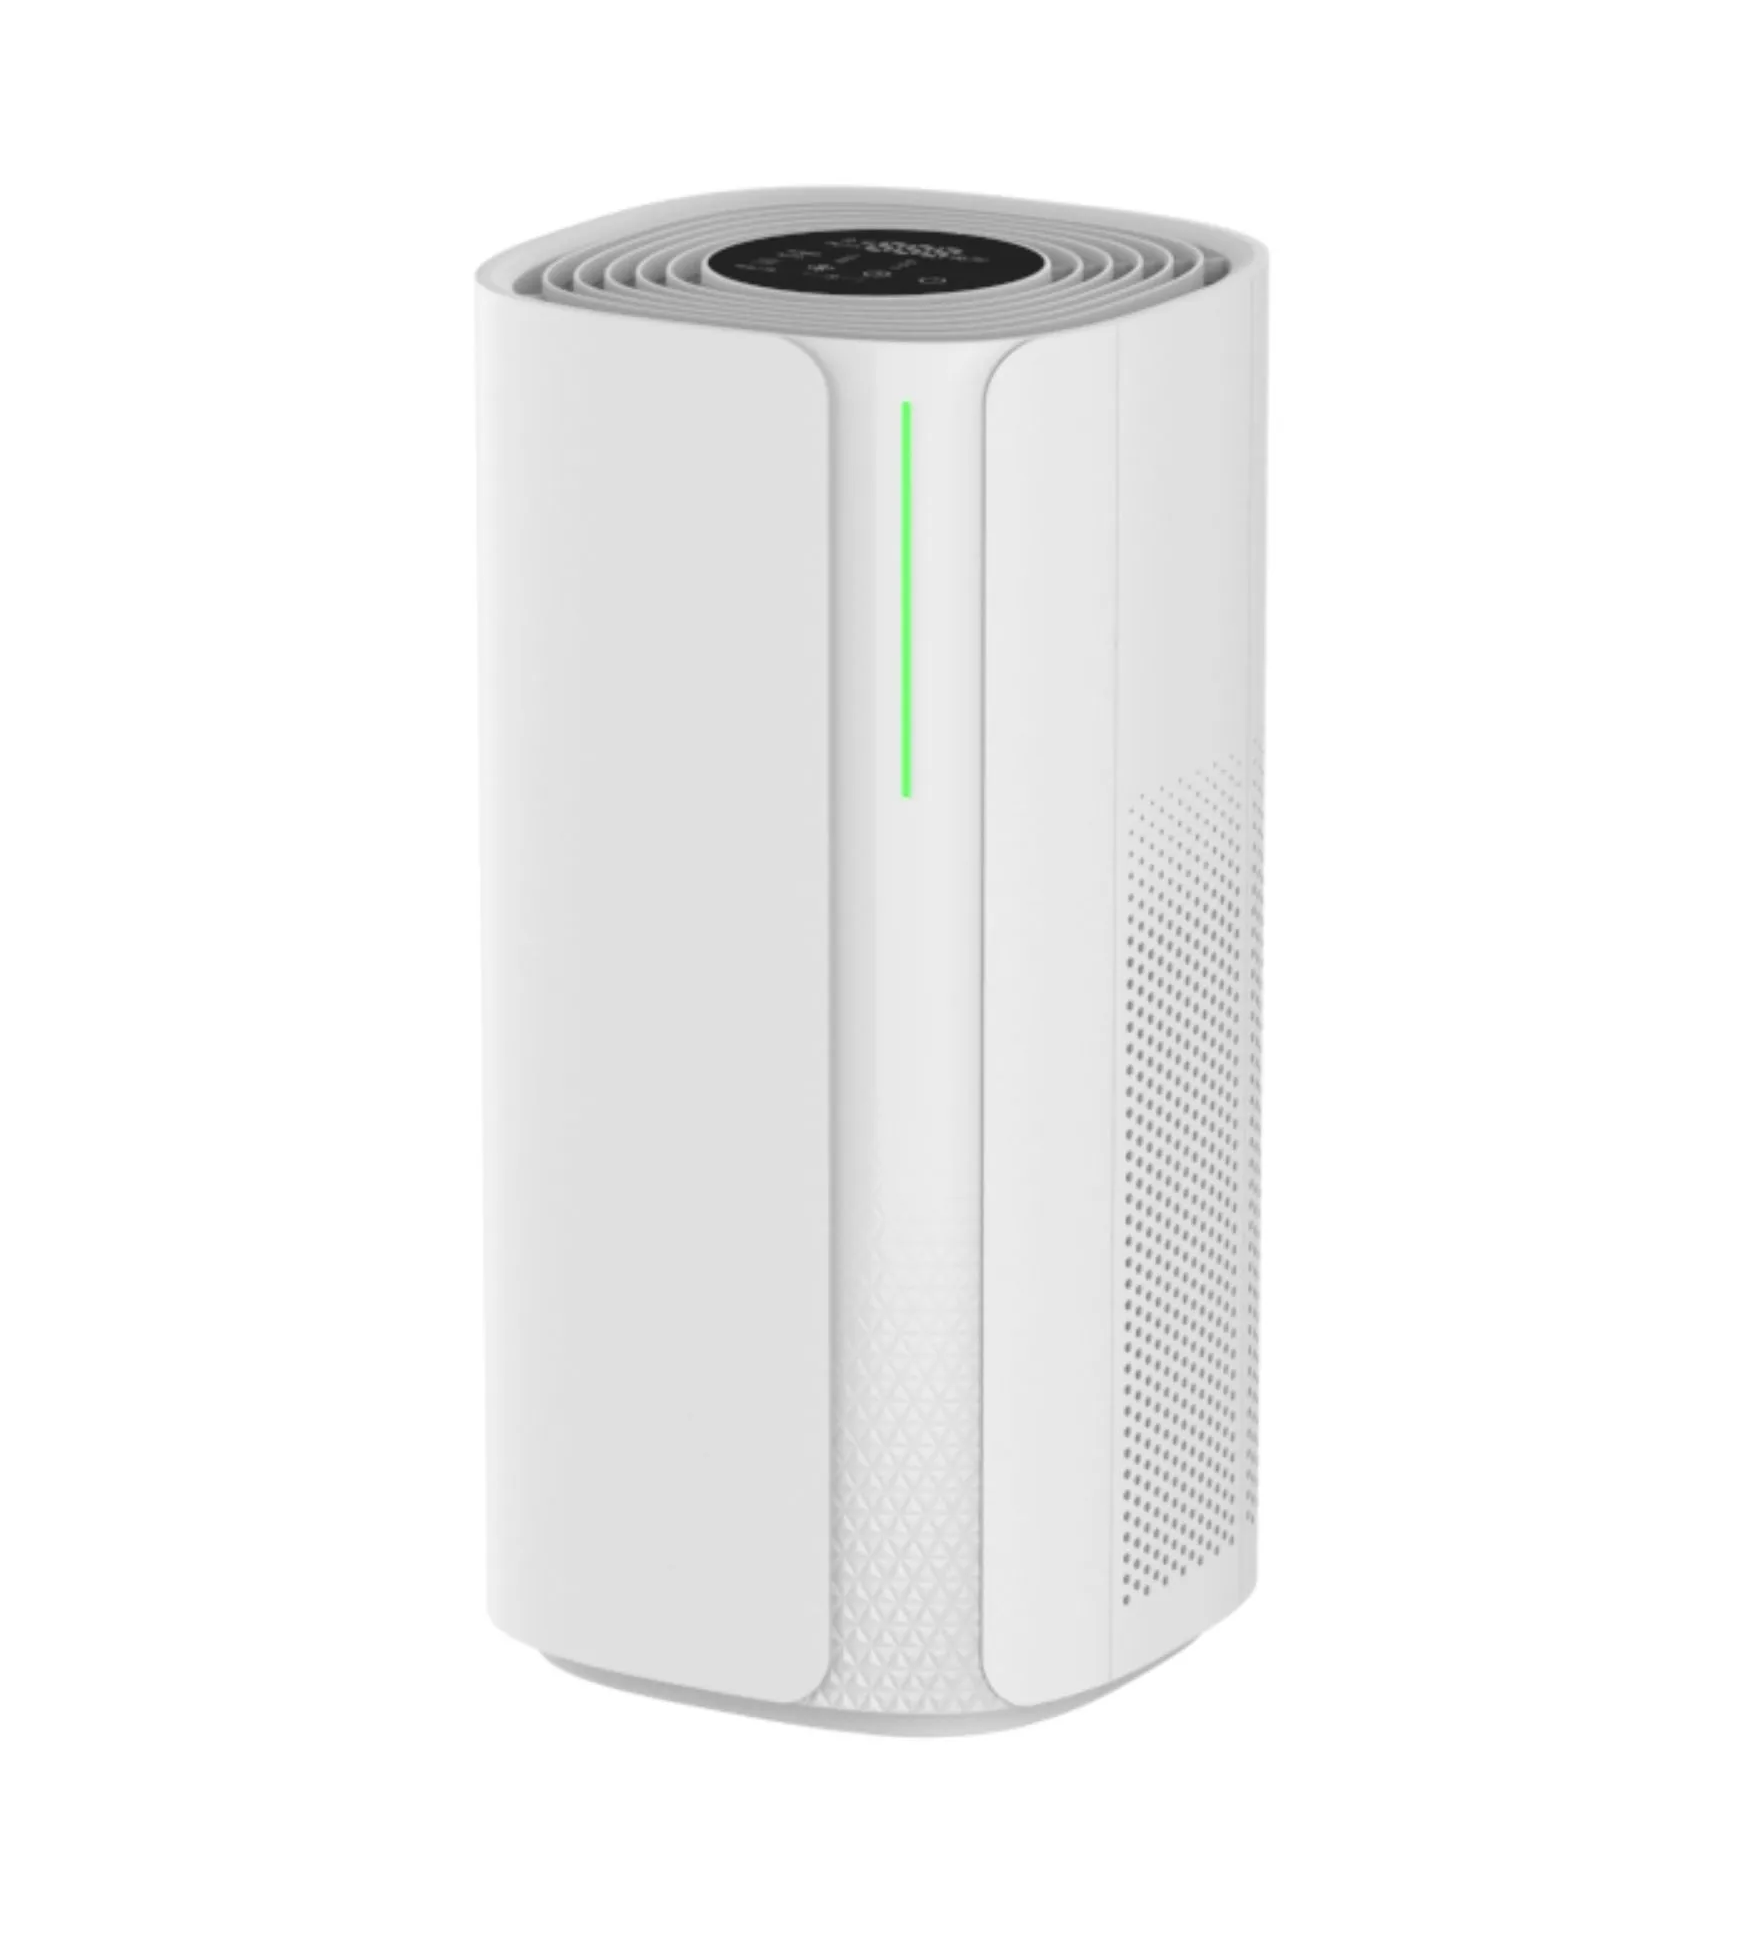 JNUO Air Purifier - Compact Design for Any Space